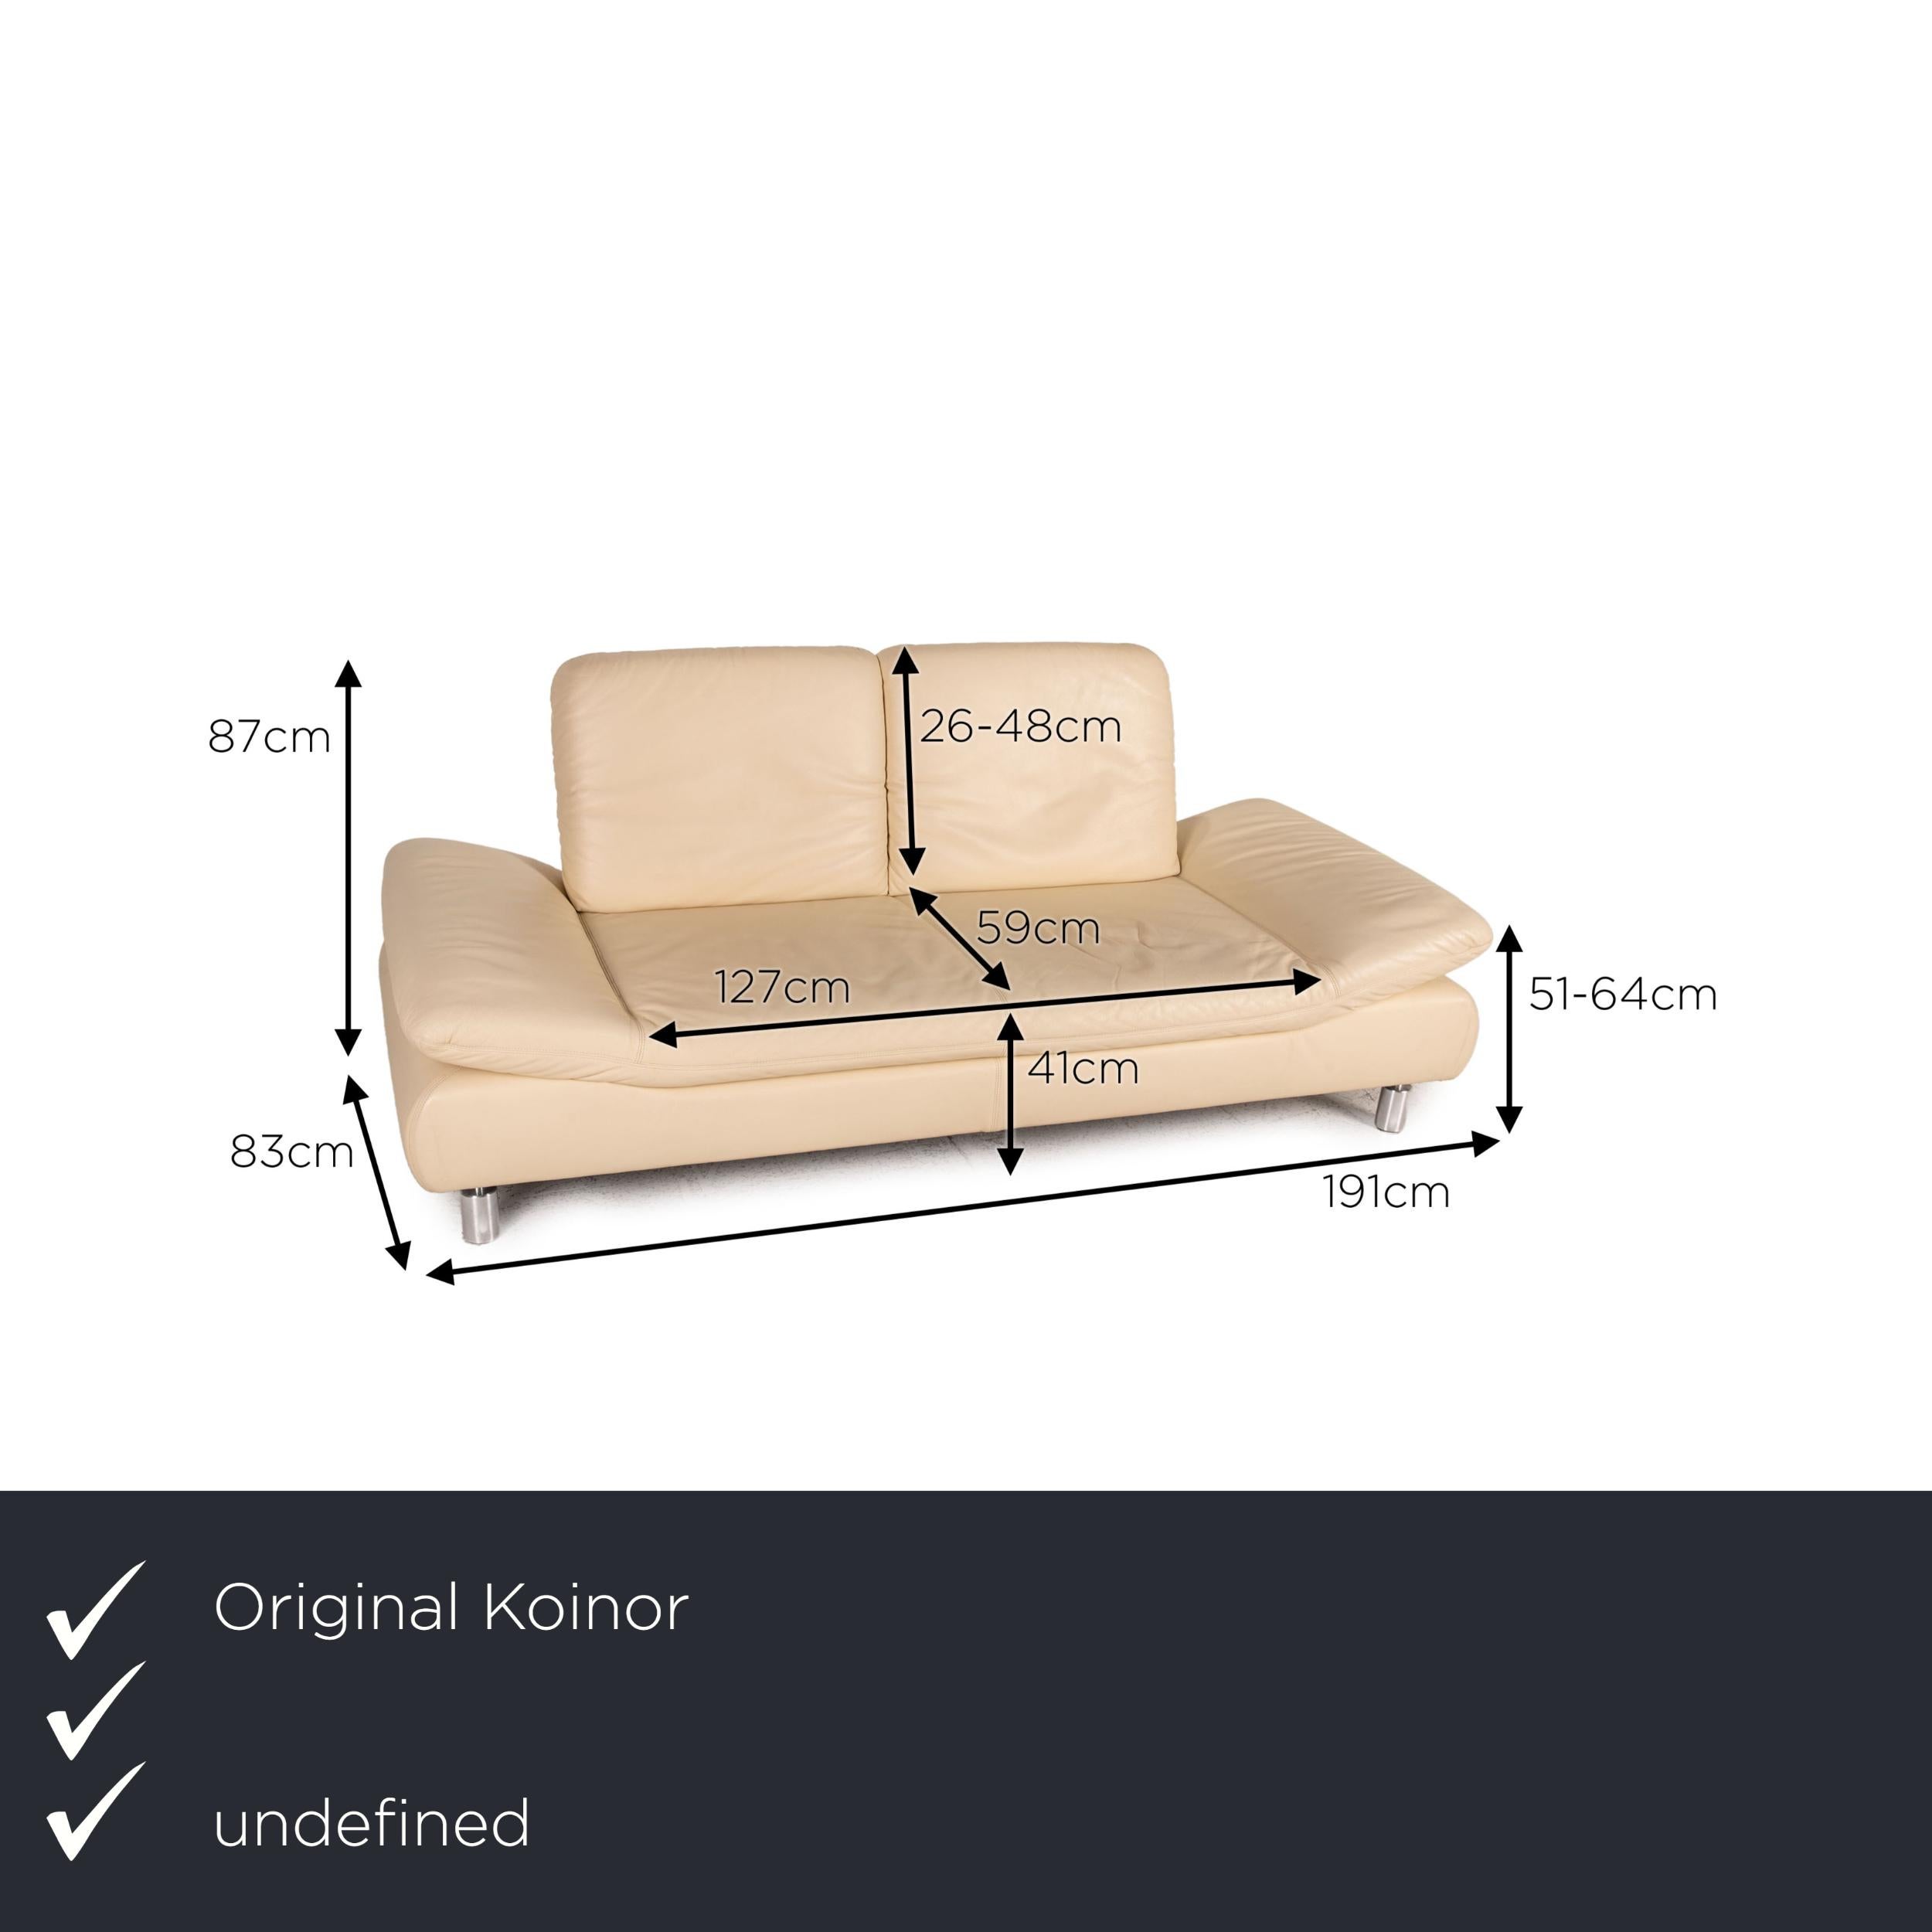 We present to you a Koinor Rivoli leather sofa set cream 1x two-seater 1x stool function.
 SKU: #17055
 

 Product measurements in centimeters:
 

 depth: 83
 width: 191
 height: 87
 seat height: 41
 rest height: 51
 seat depth: 59
